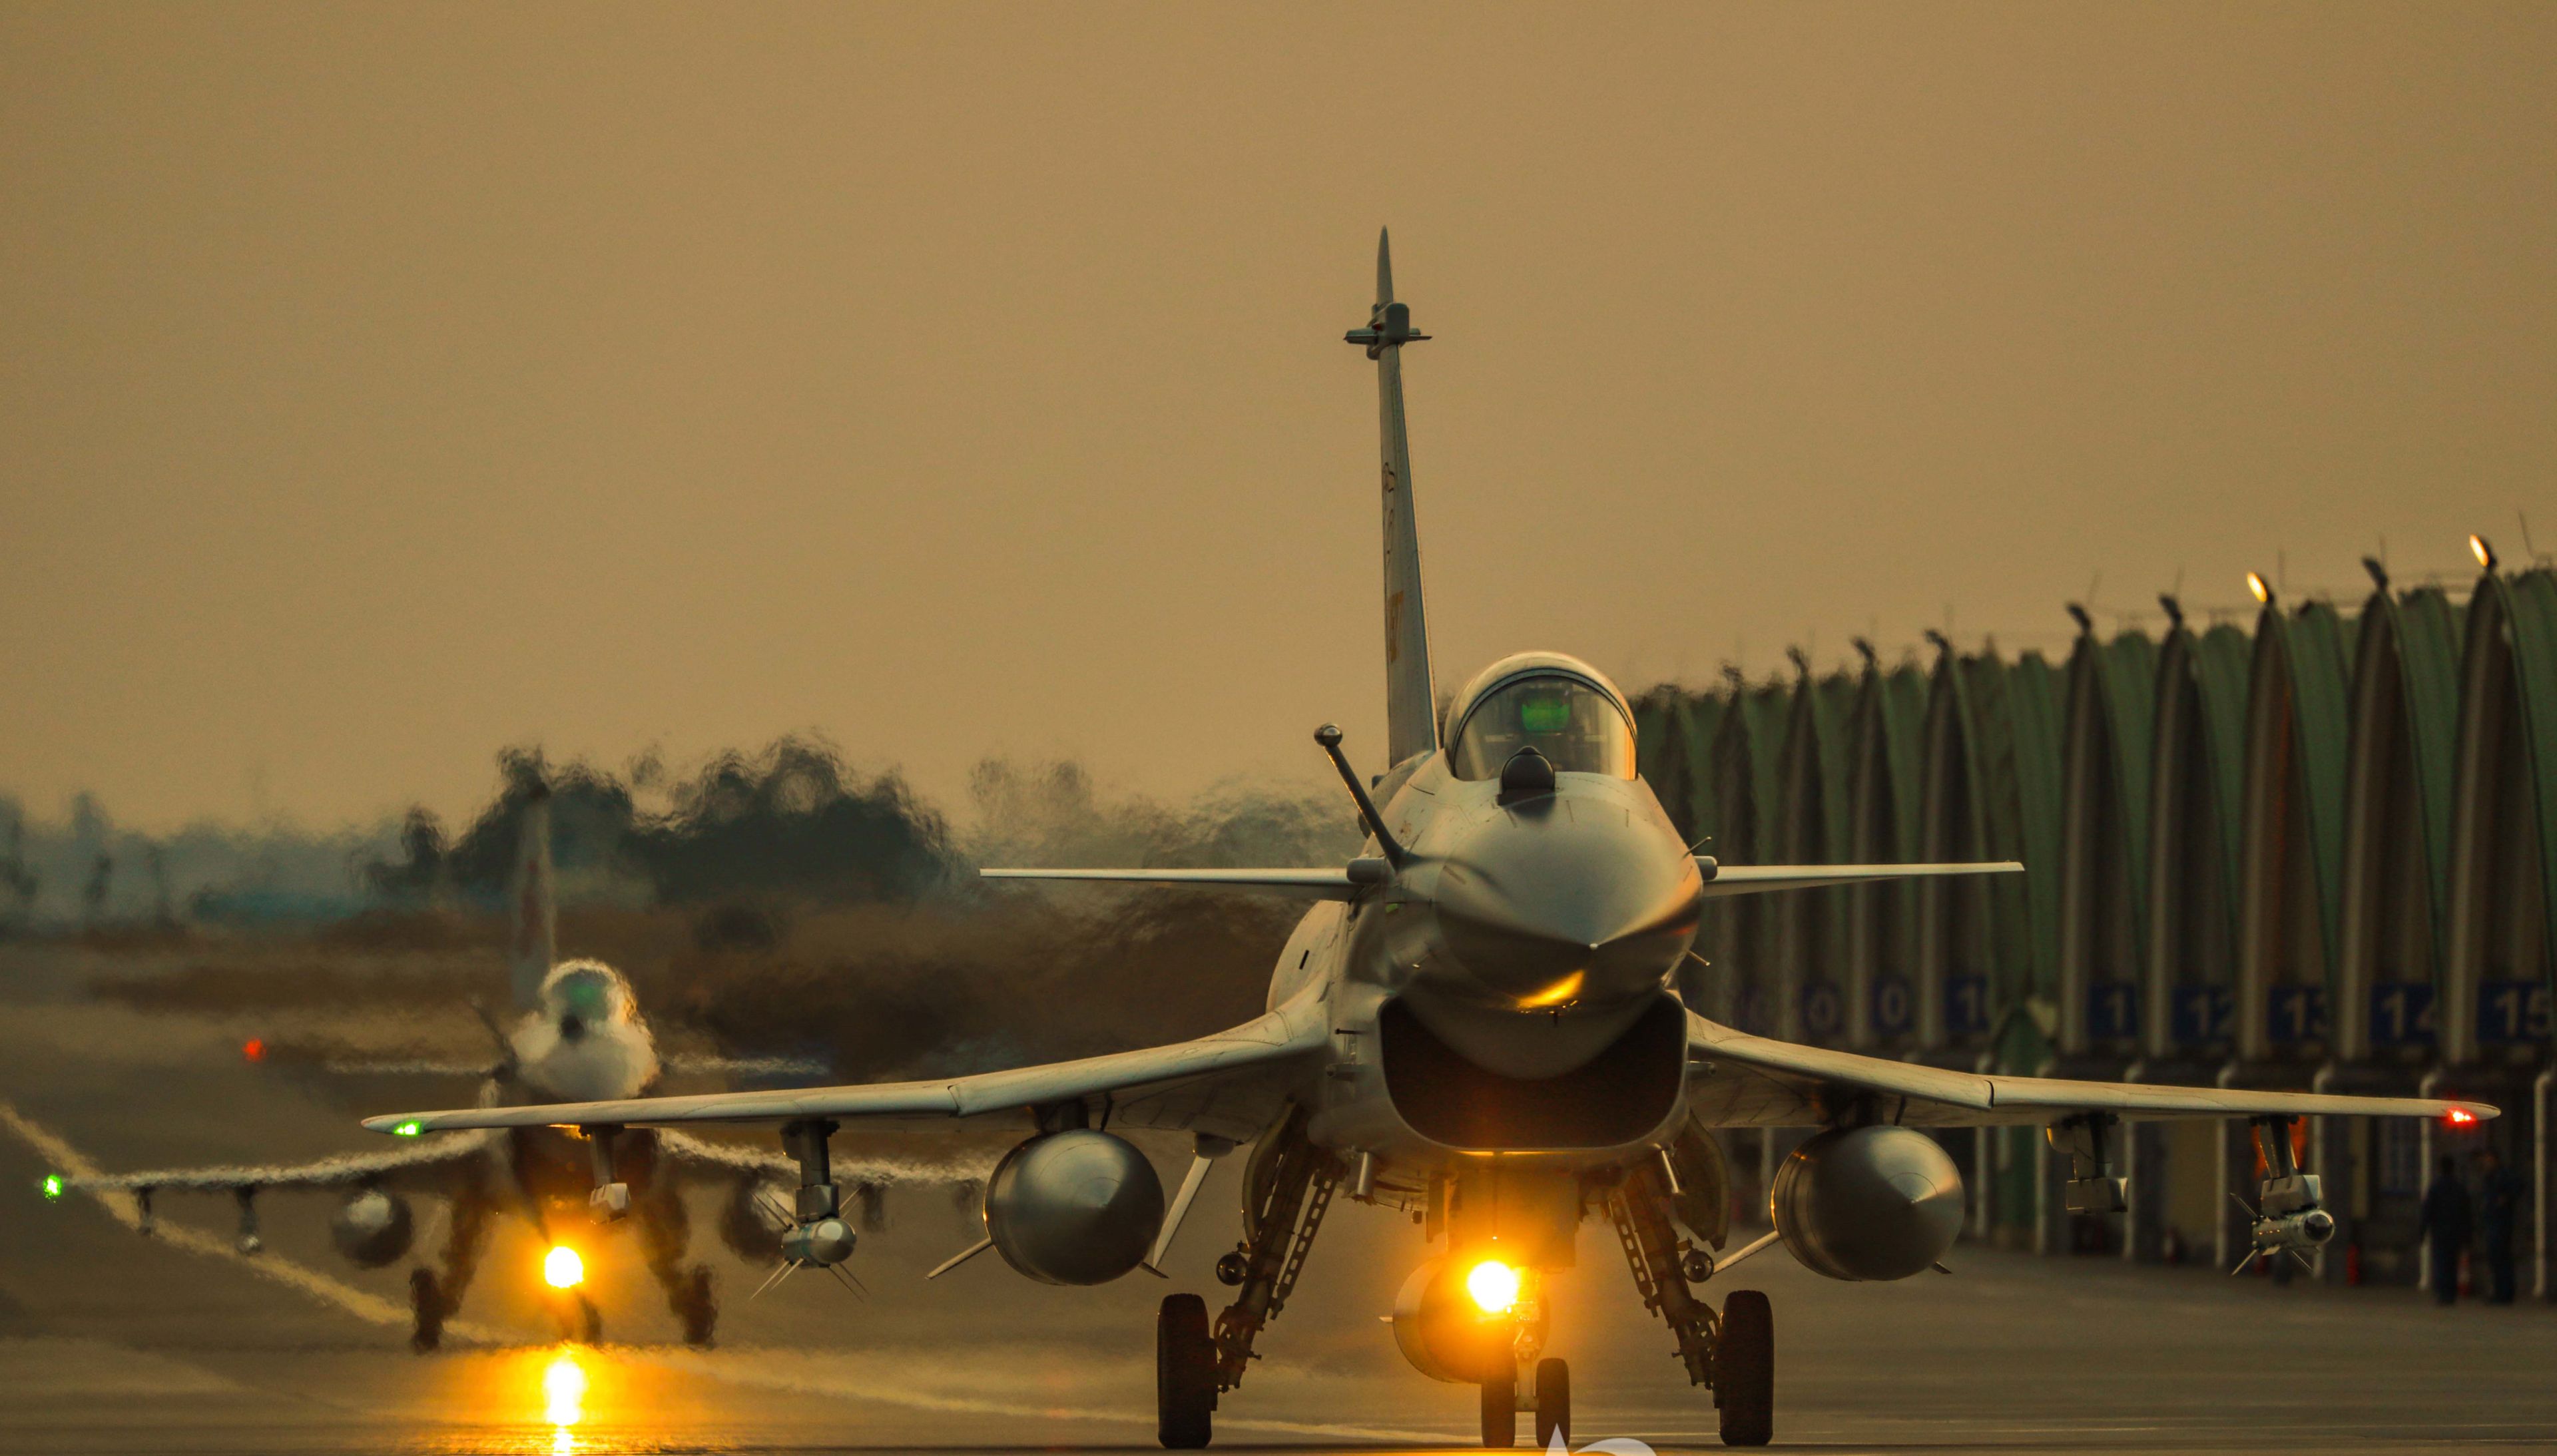 J-10 Fighter Jets - Chinese Air Force